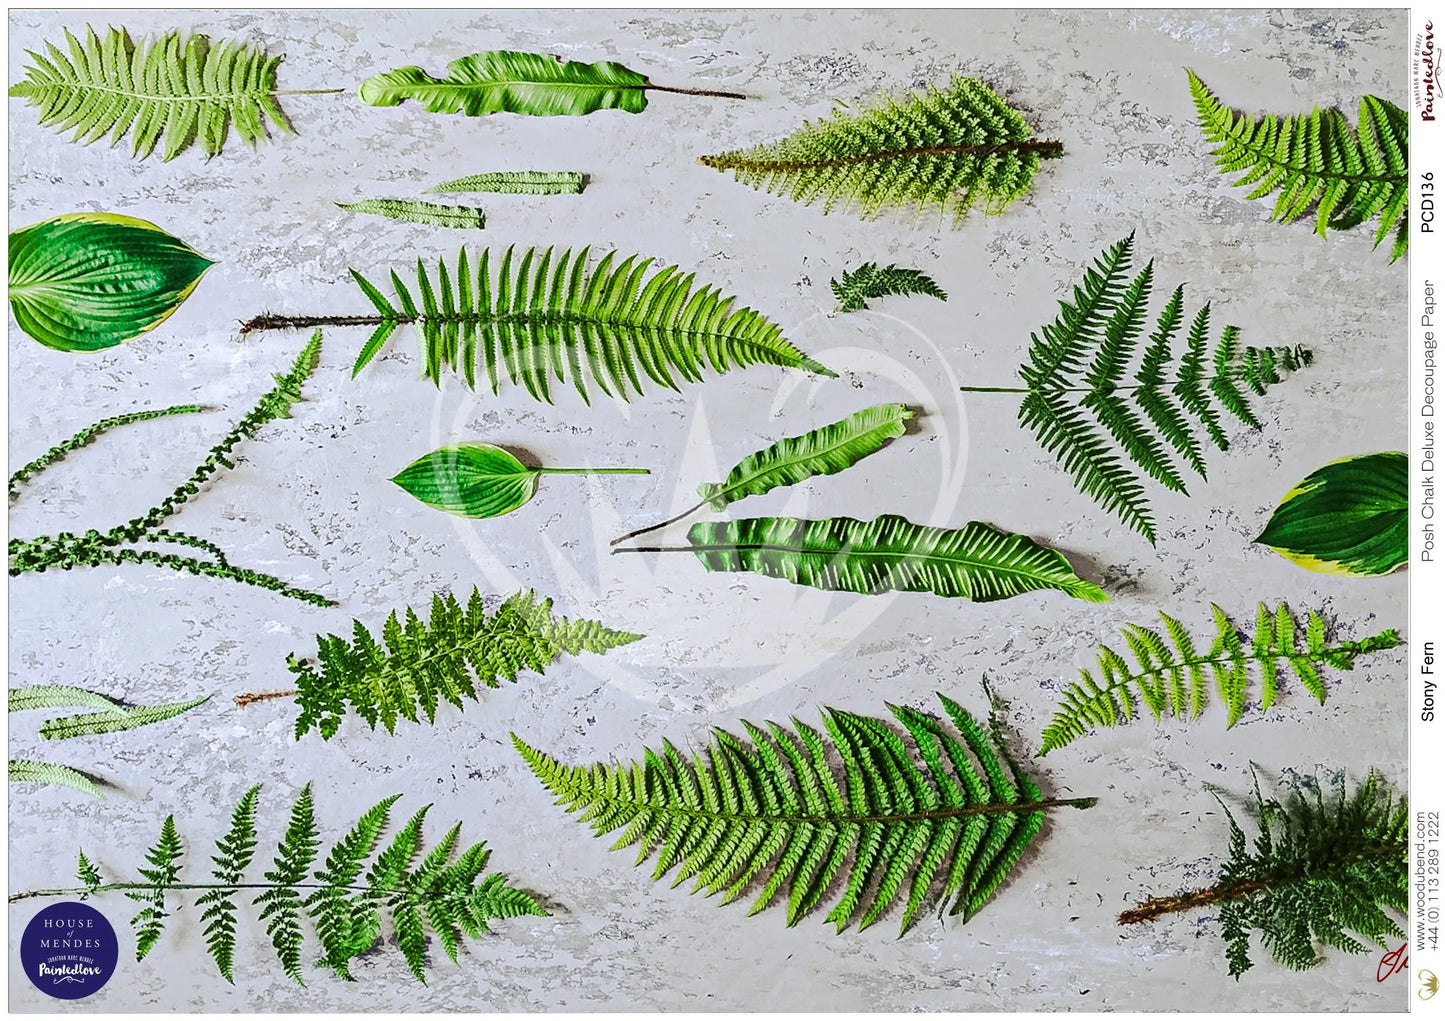 Stony Fern A1 Posh Chalk Deluxe Decoupage from The House of Mendes